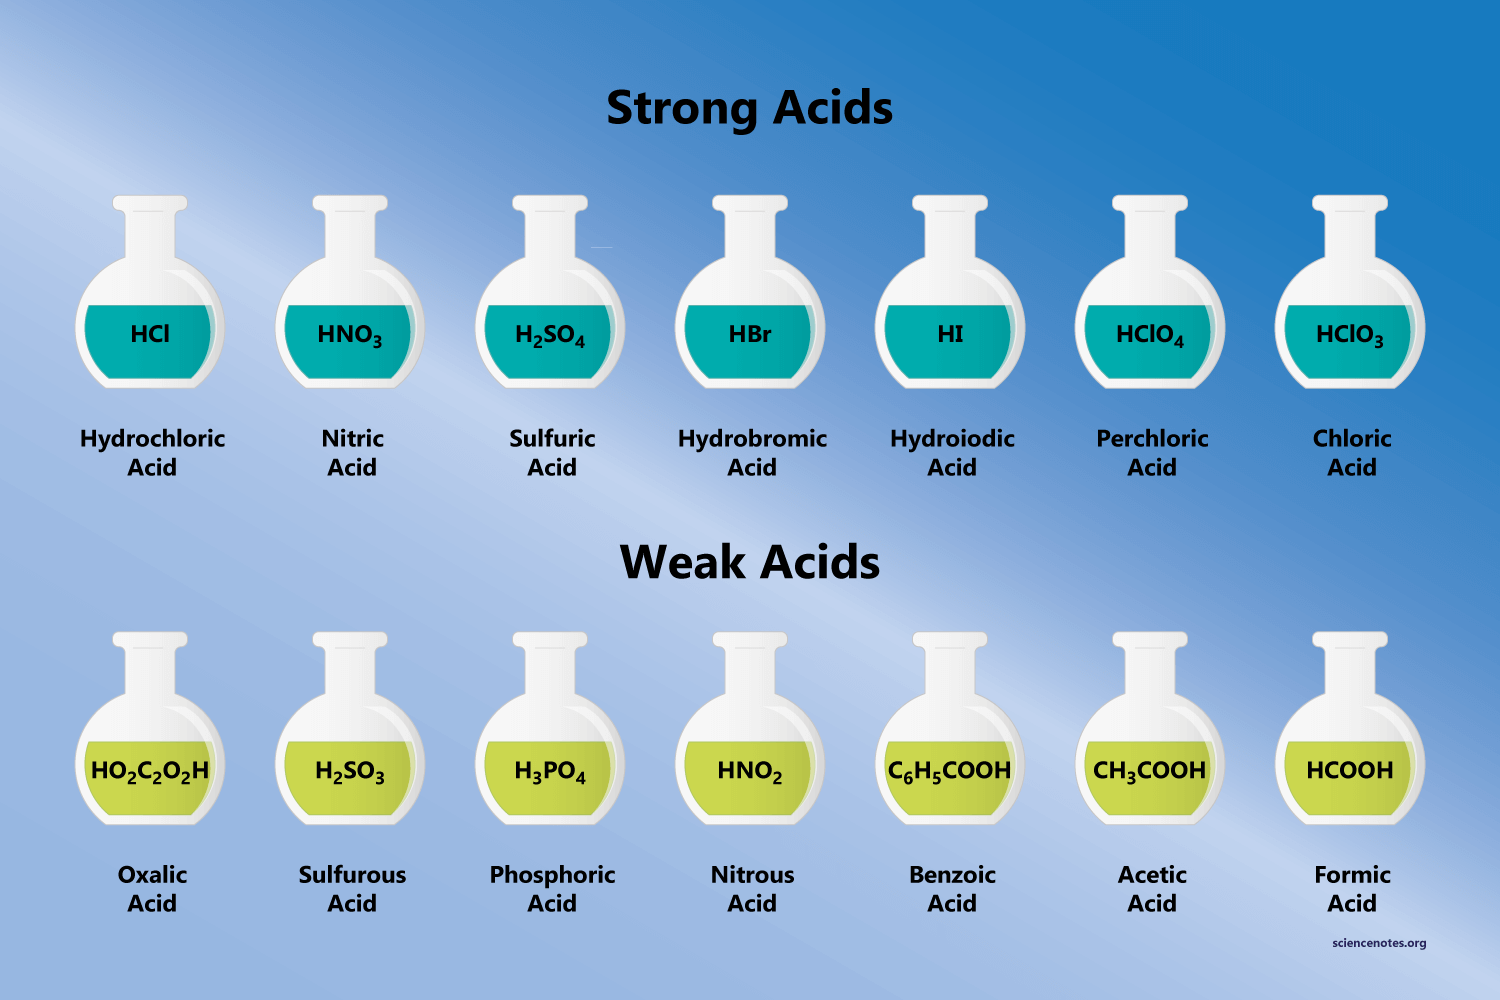 Examples of strong and weak acids: